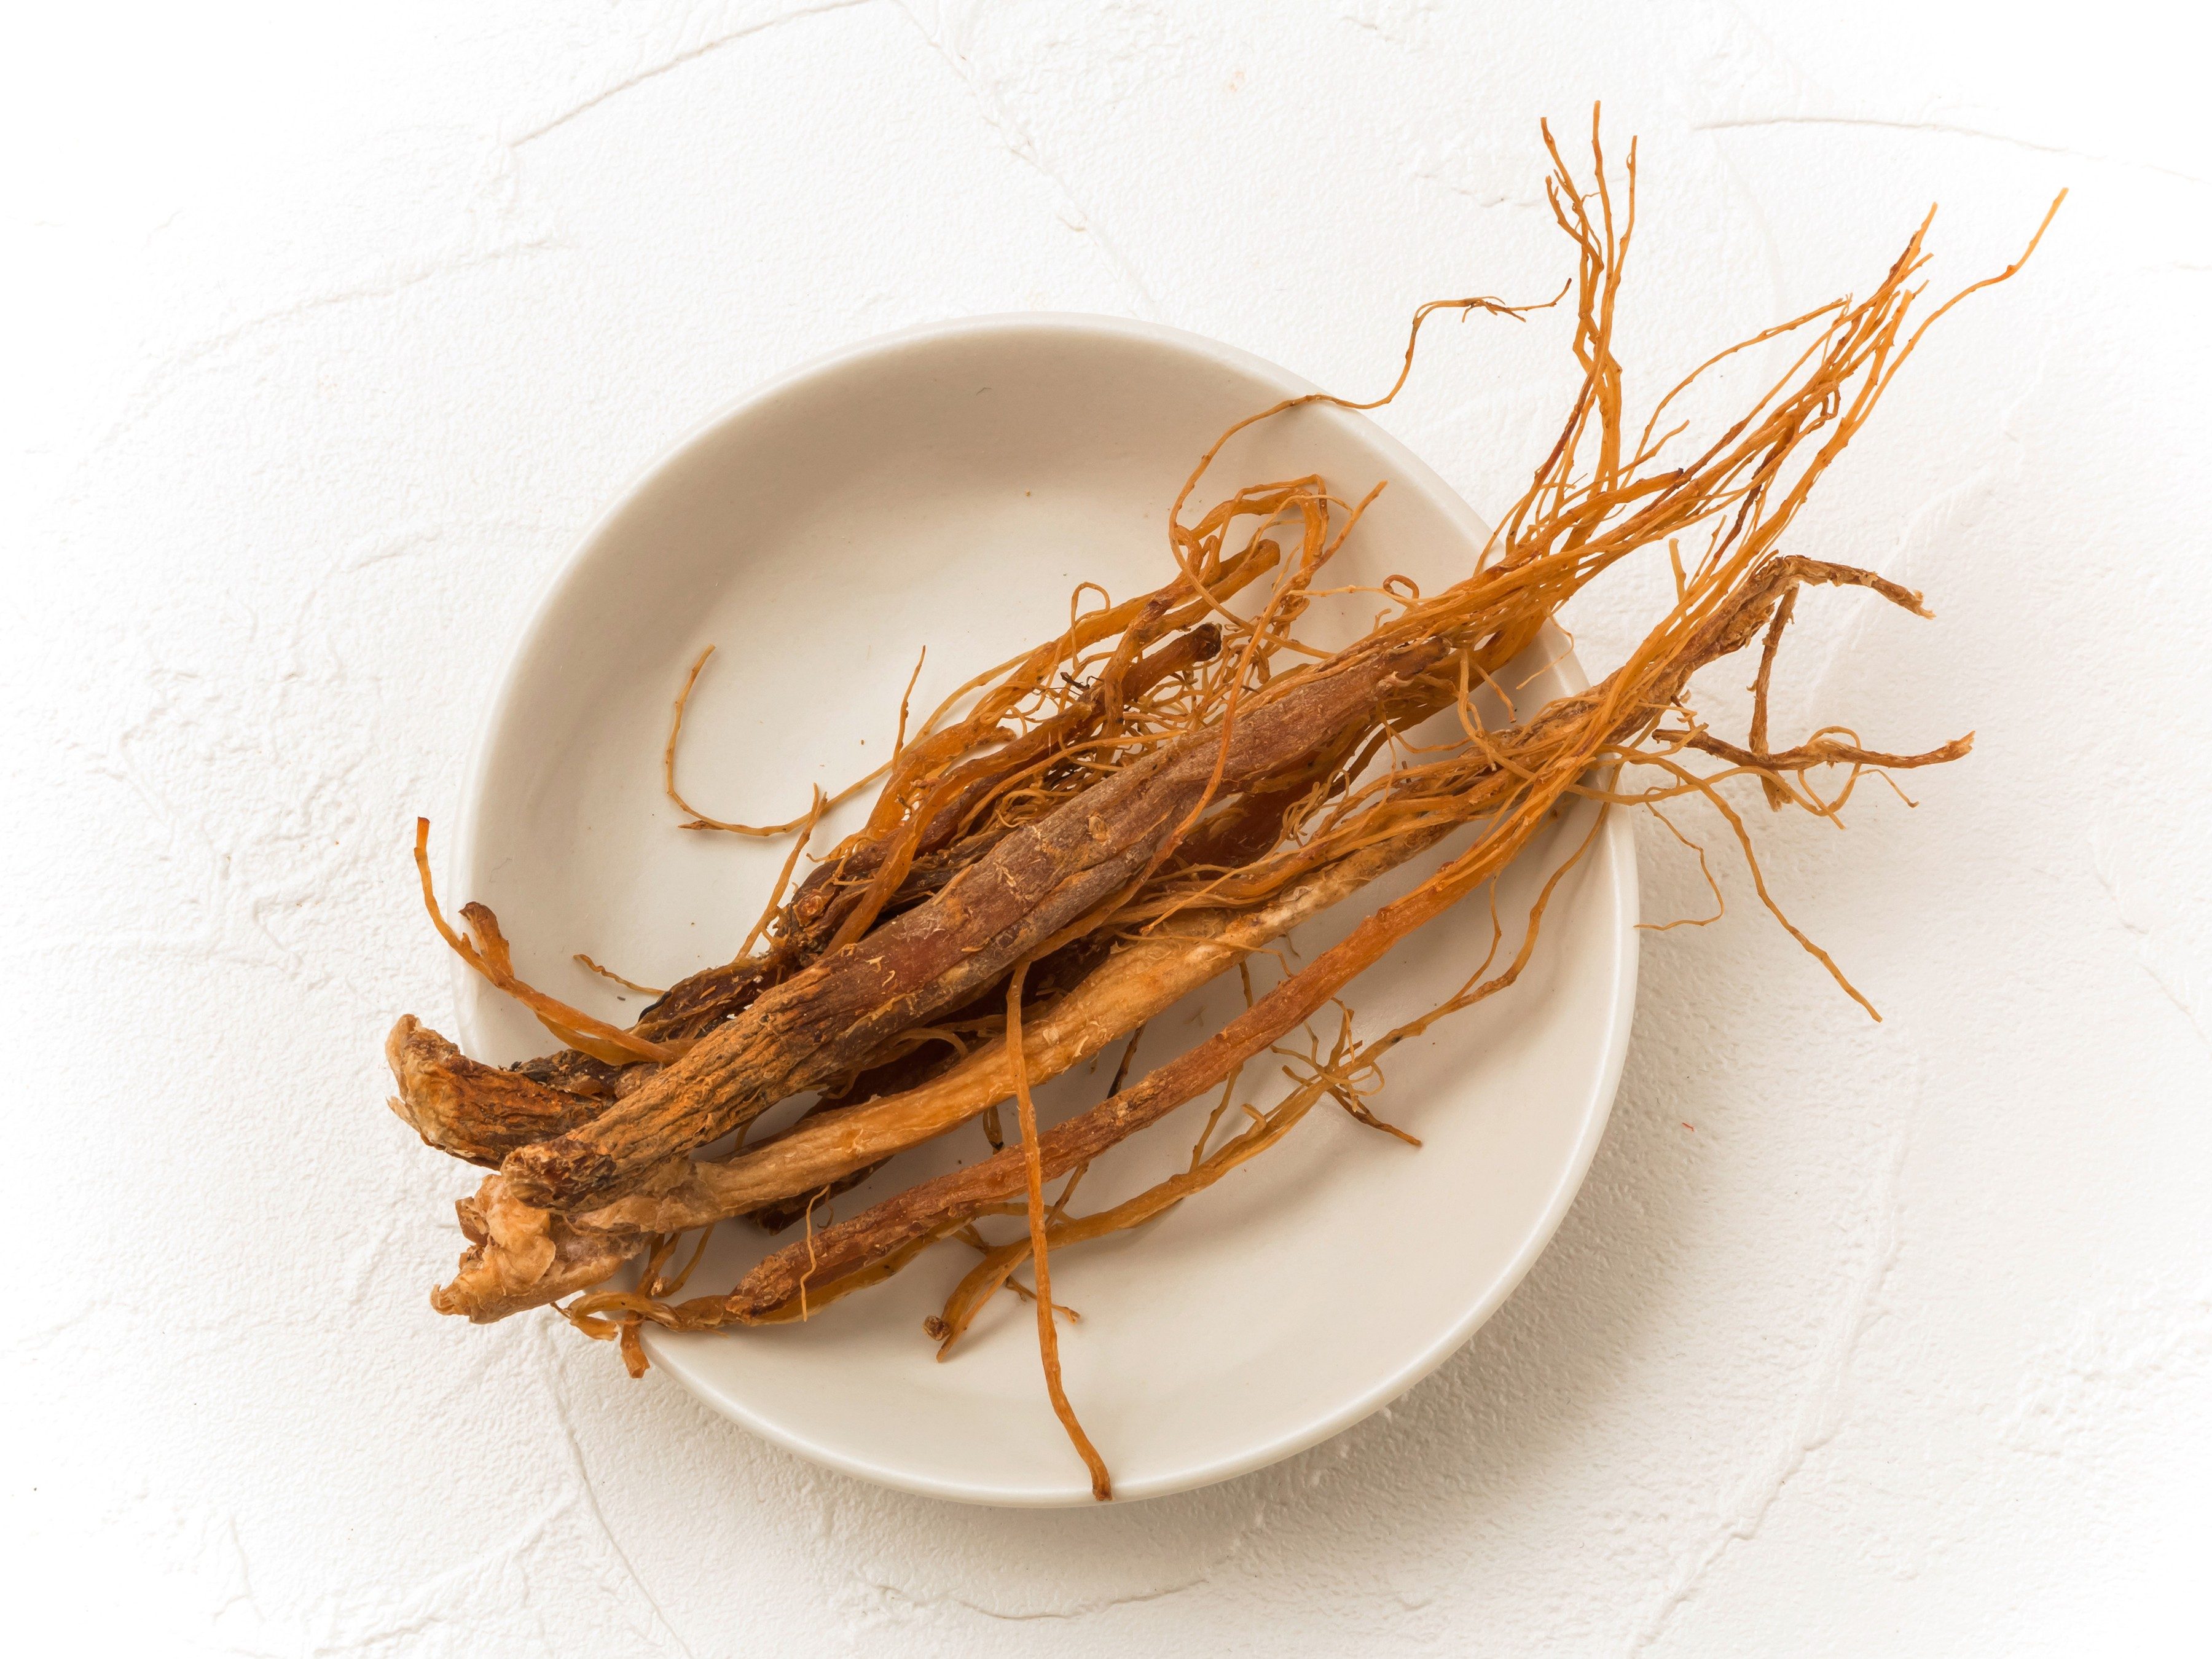 2. American and Panax Ginseng